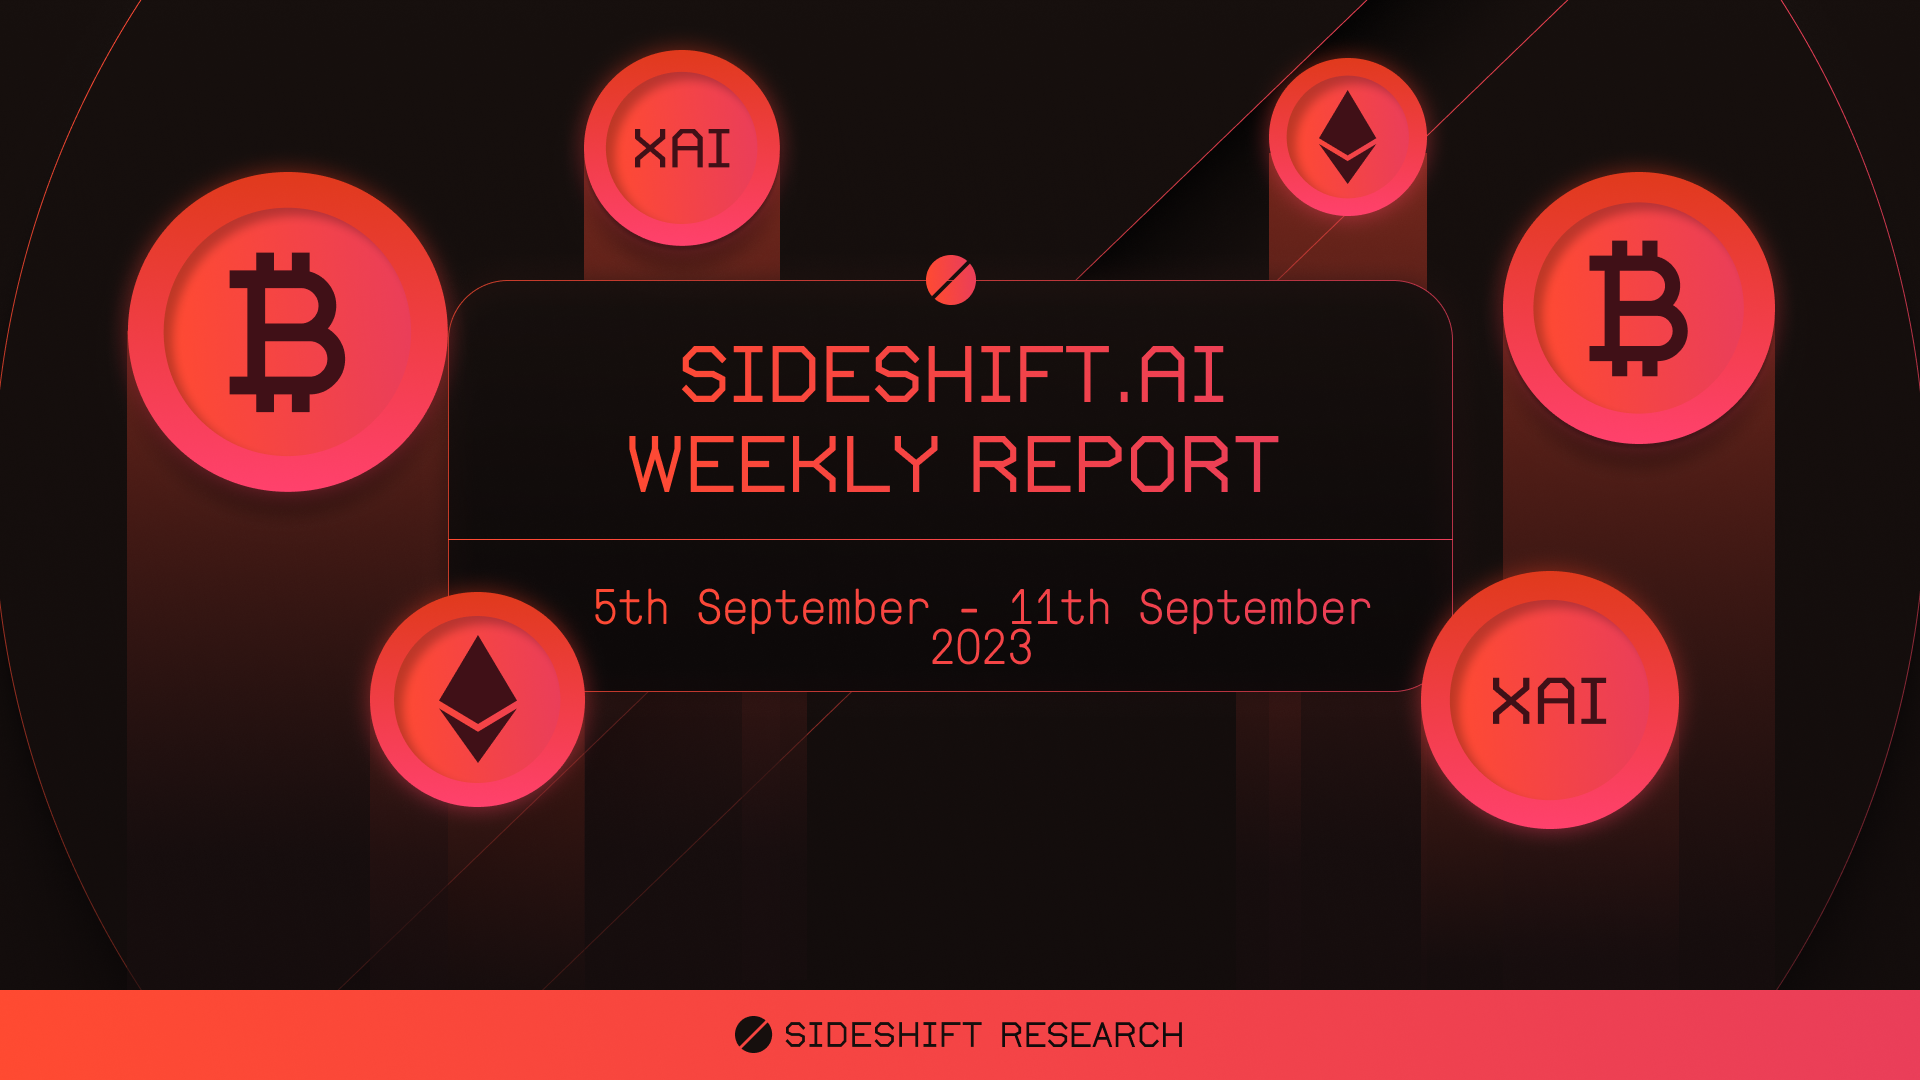 SideShift.ai Weekly Report | 5th September - 11th September 2023